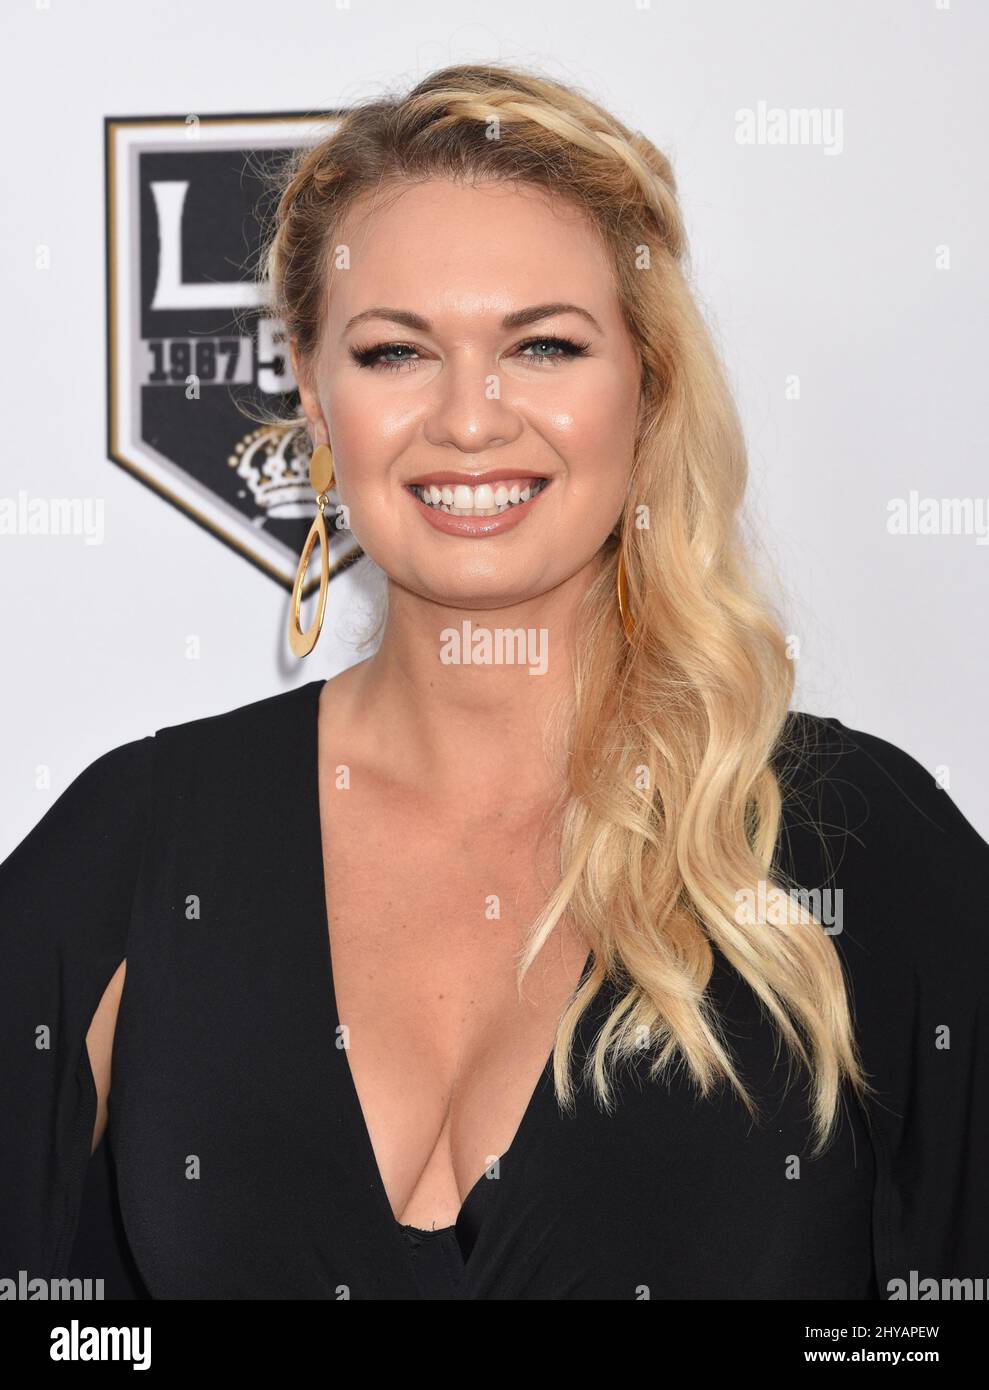 Angeline-Rose Troy arrives for the CHLA 'Once Upon A Time' Gala held at The Event Deck at L.A. Live, Los Angeles. Stock Photo